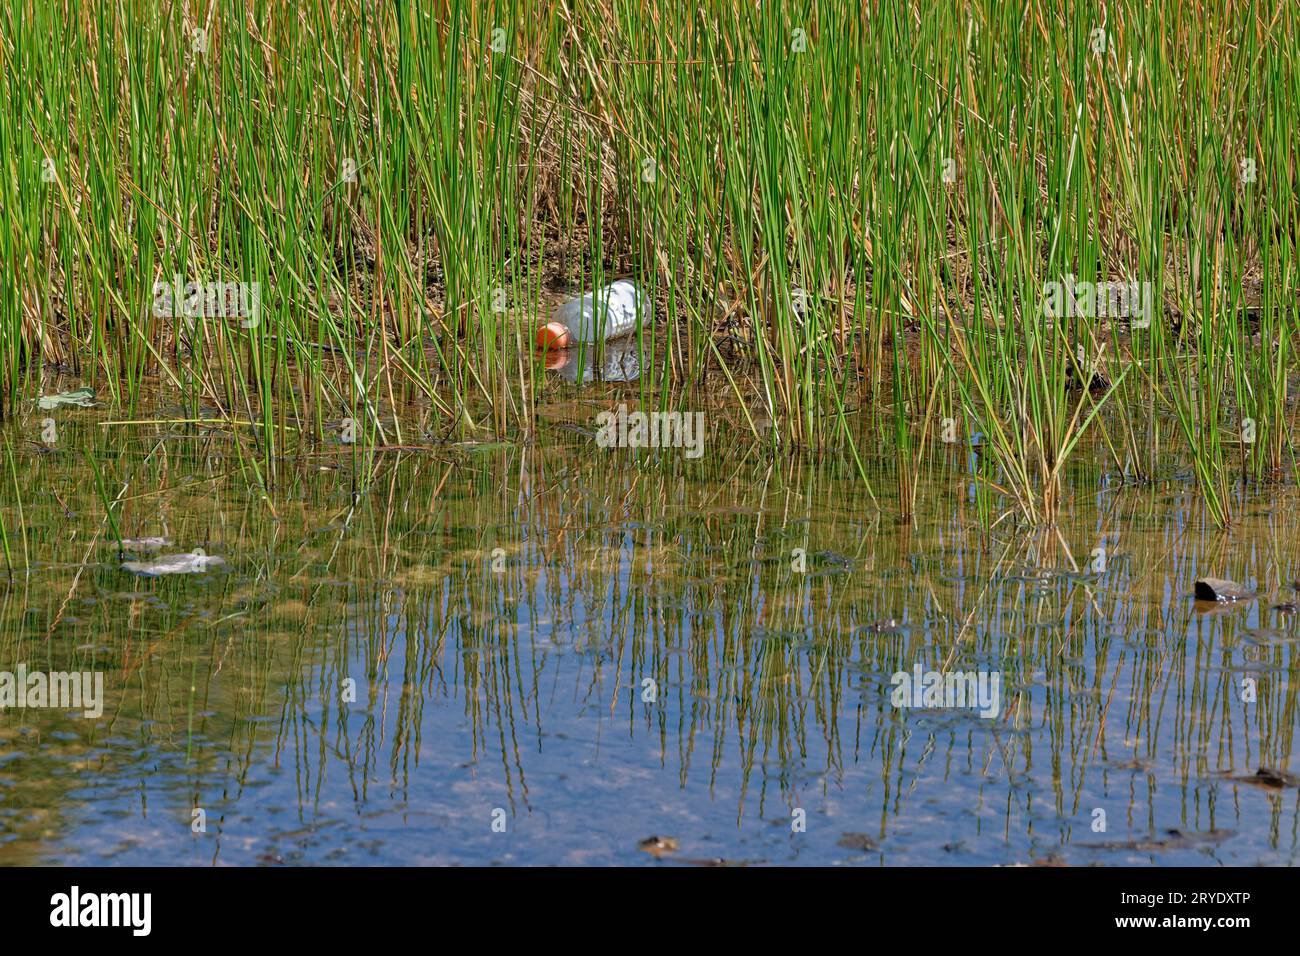 A floating plastic water bottle in between the tall grasses in the lake with the cap still on polluting the environment closeup view on a sunny day in Stock Photo